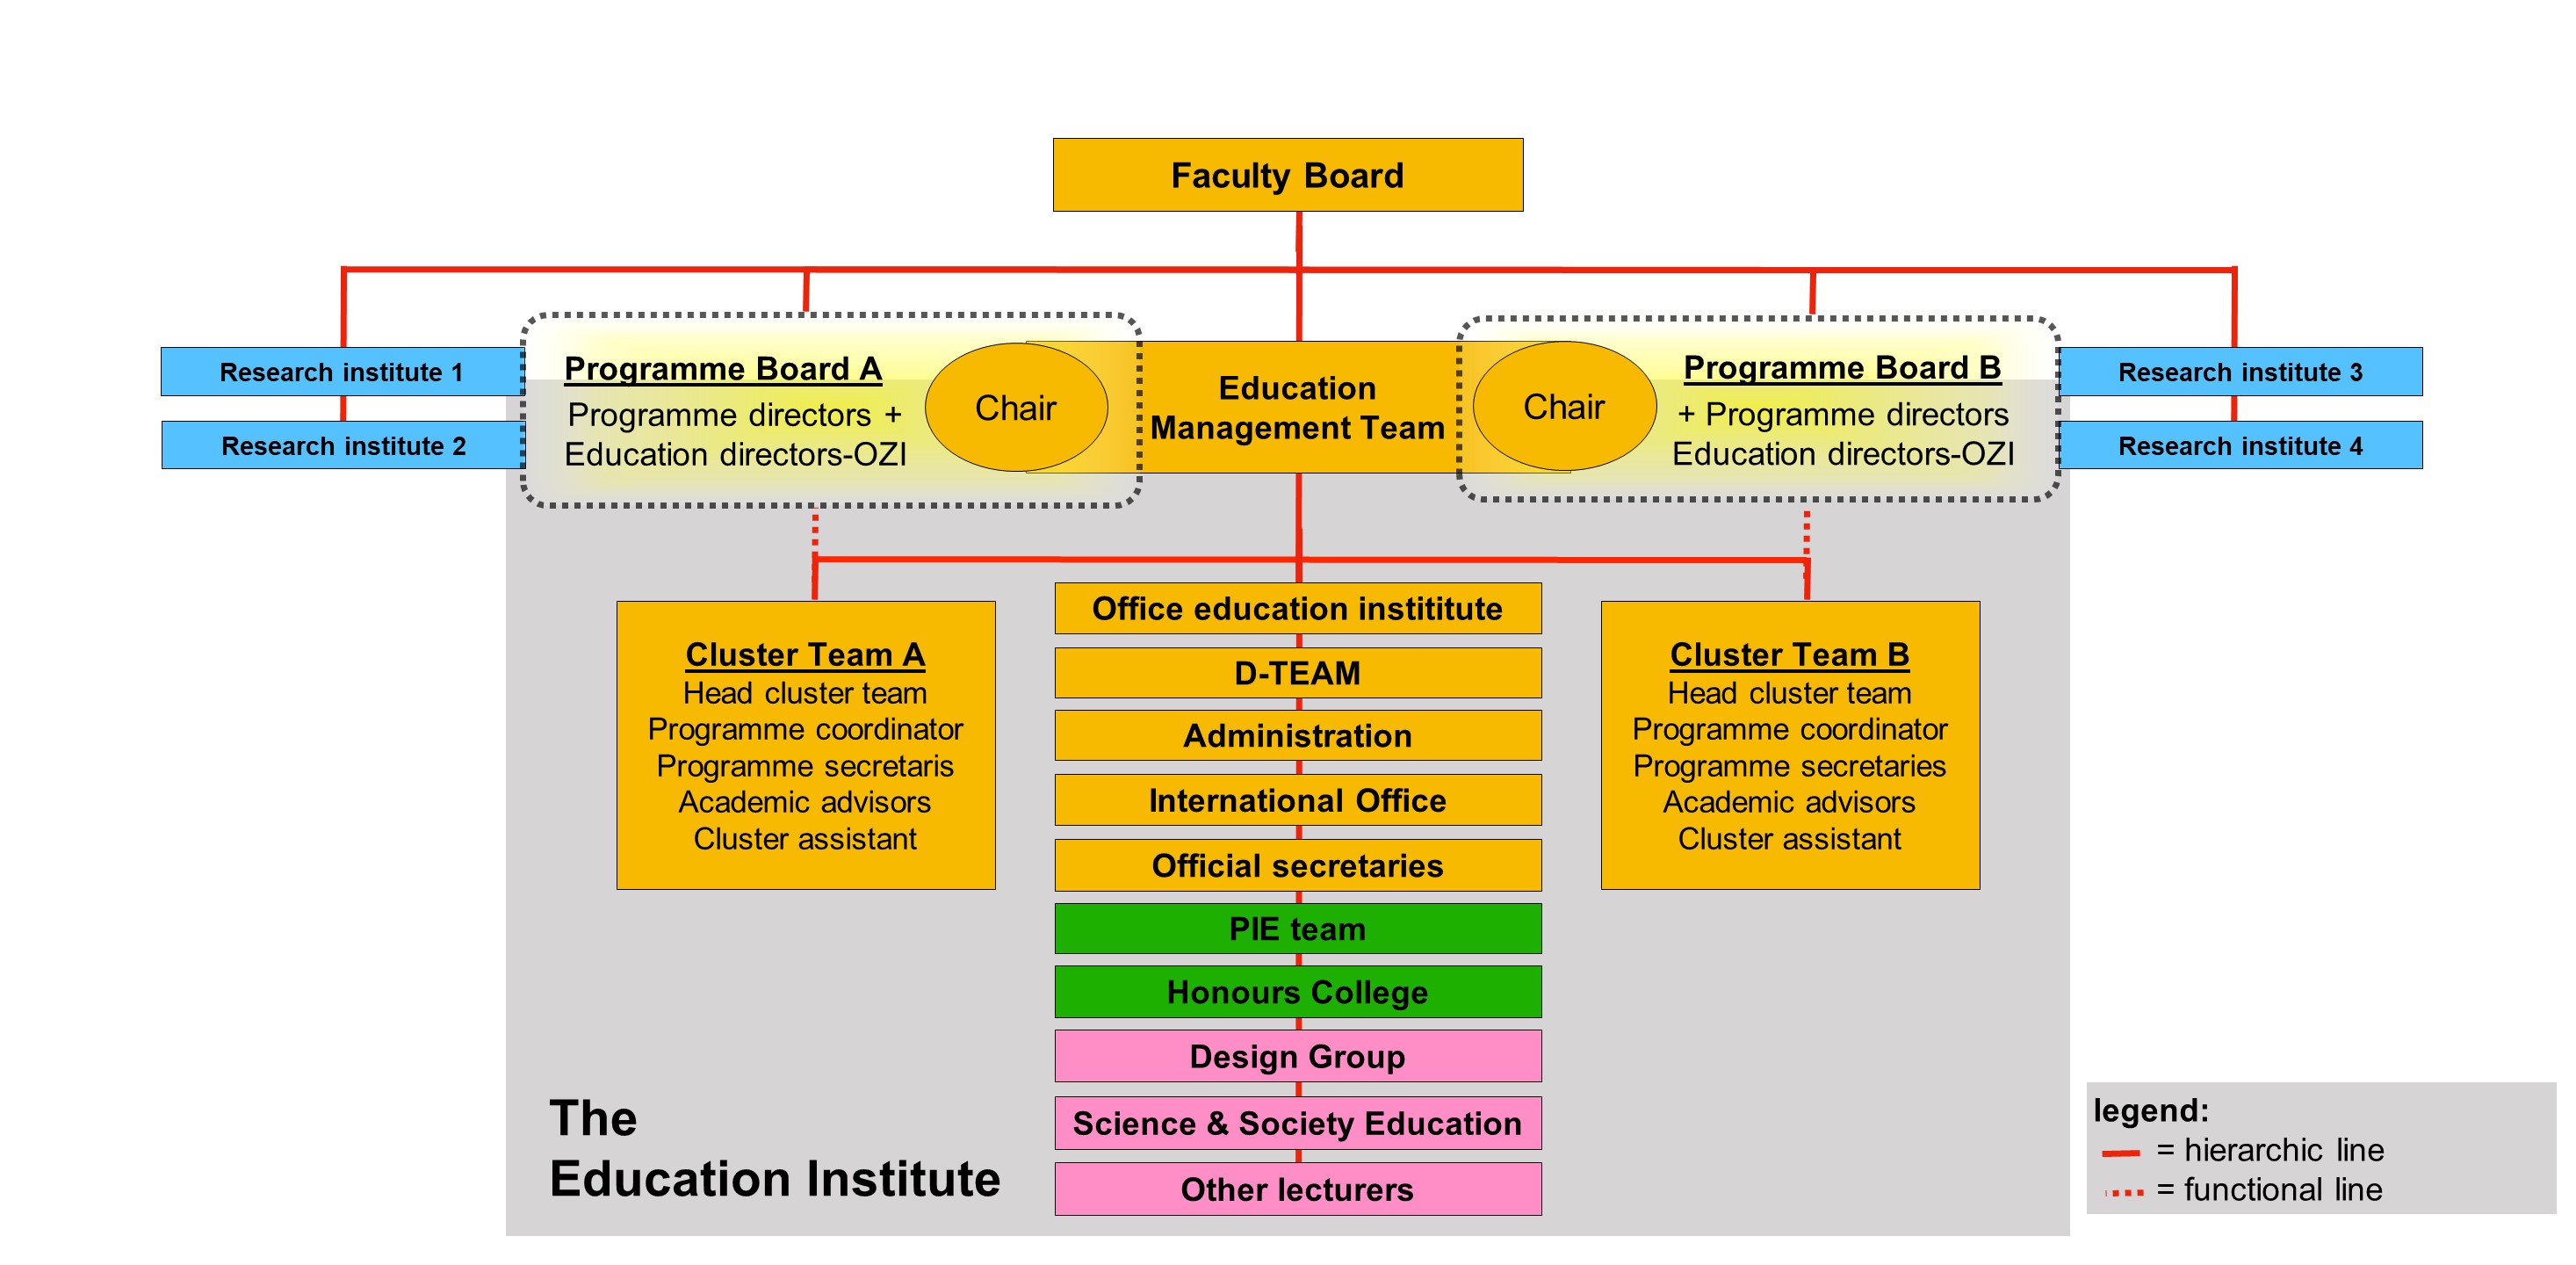 Structure of the Faculty